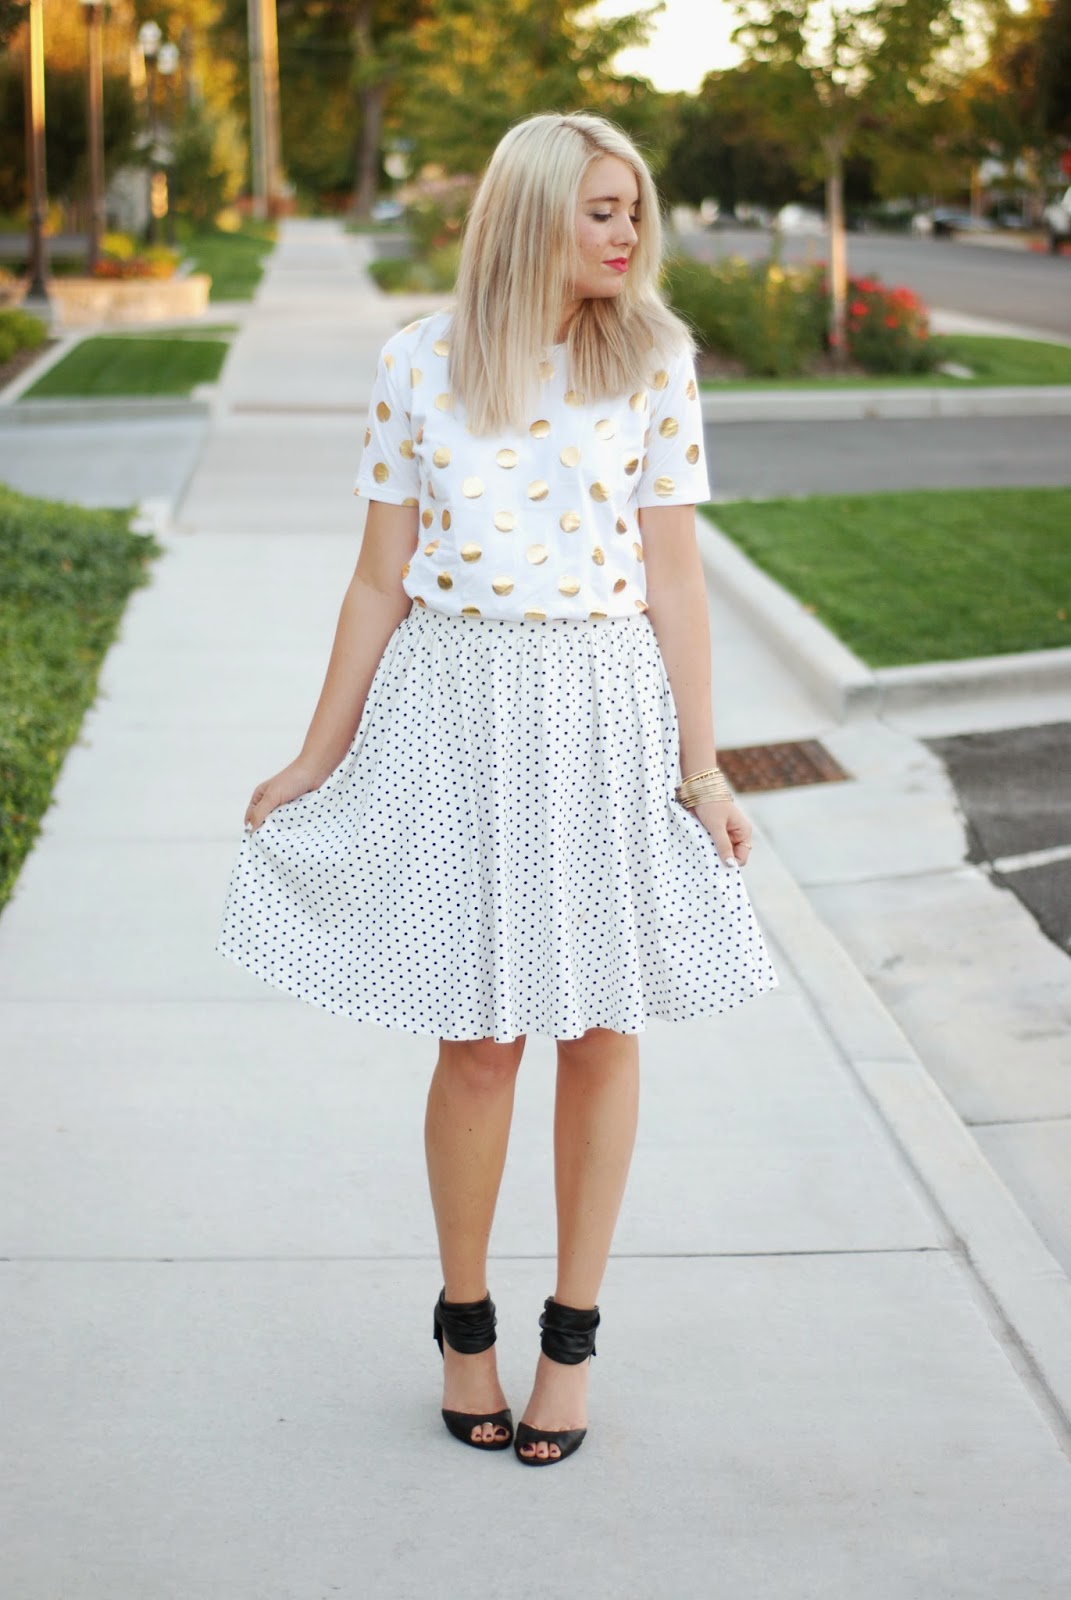 DOUBLE POLKA DOTS + NORDSTROM GIVEAWAY! | The Red Closet Diary